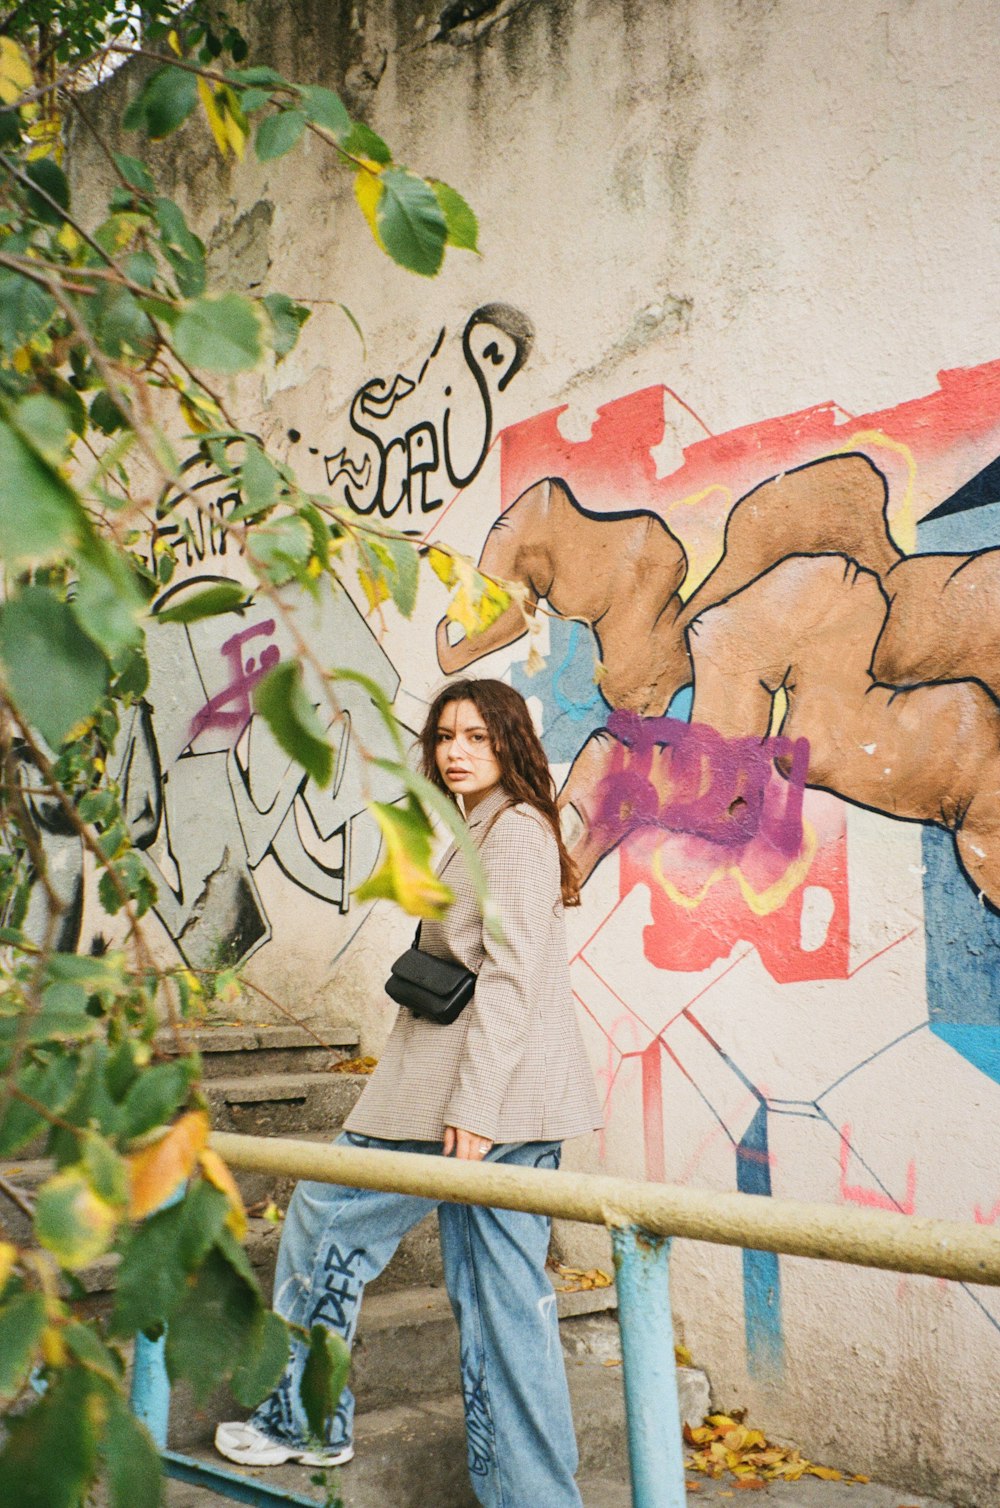 a person standing next to a wall with graffiti